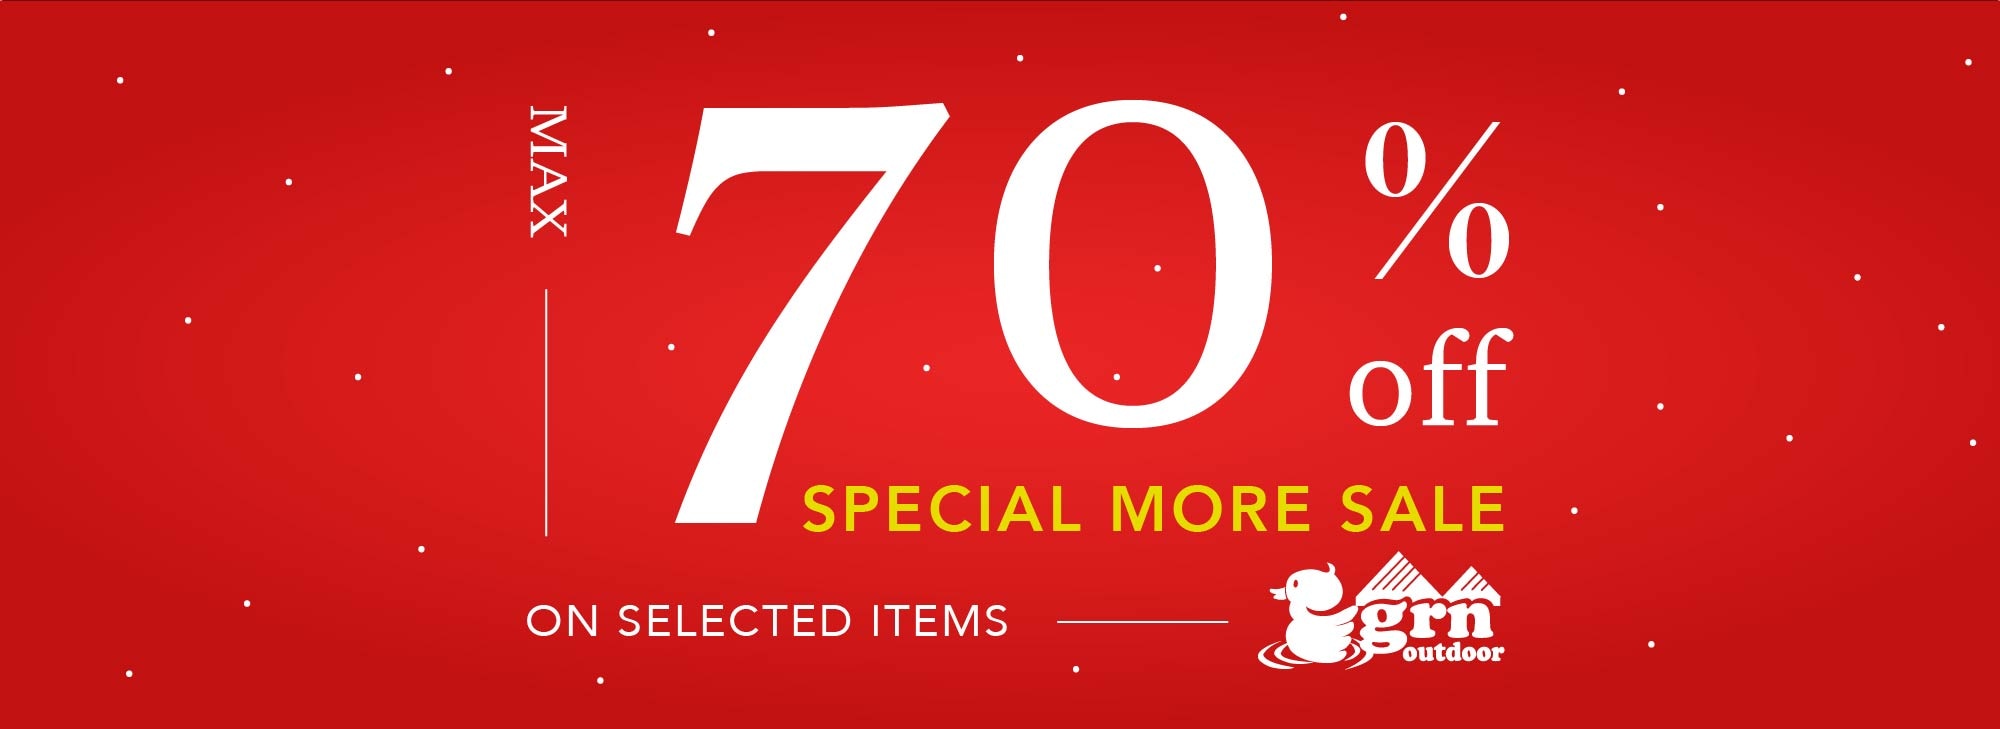 SPECIAL MORE SALE